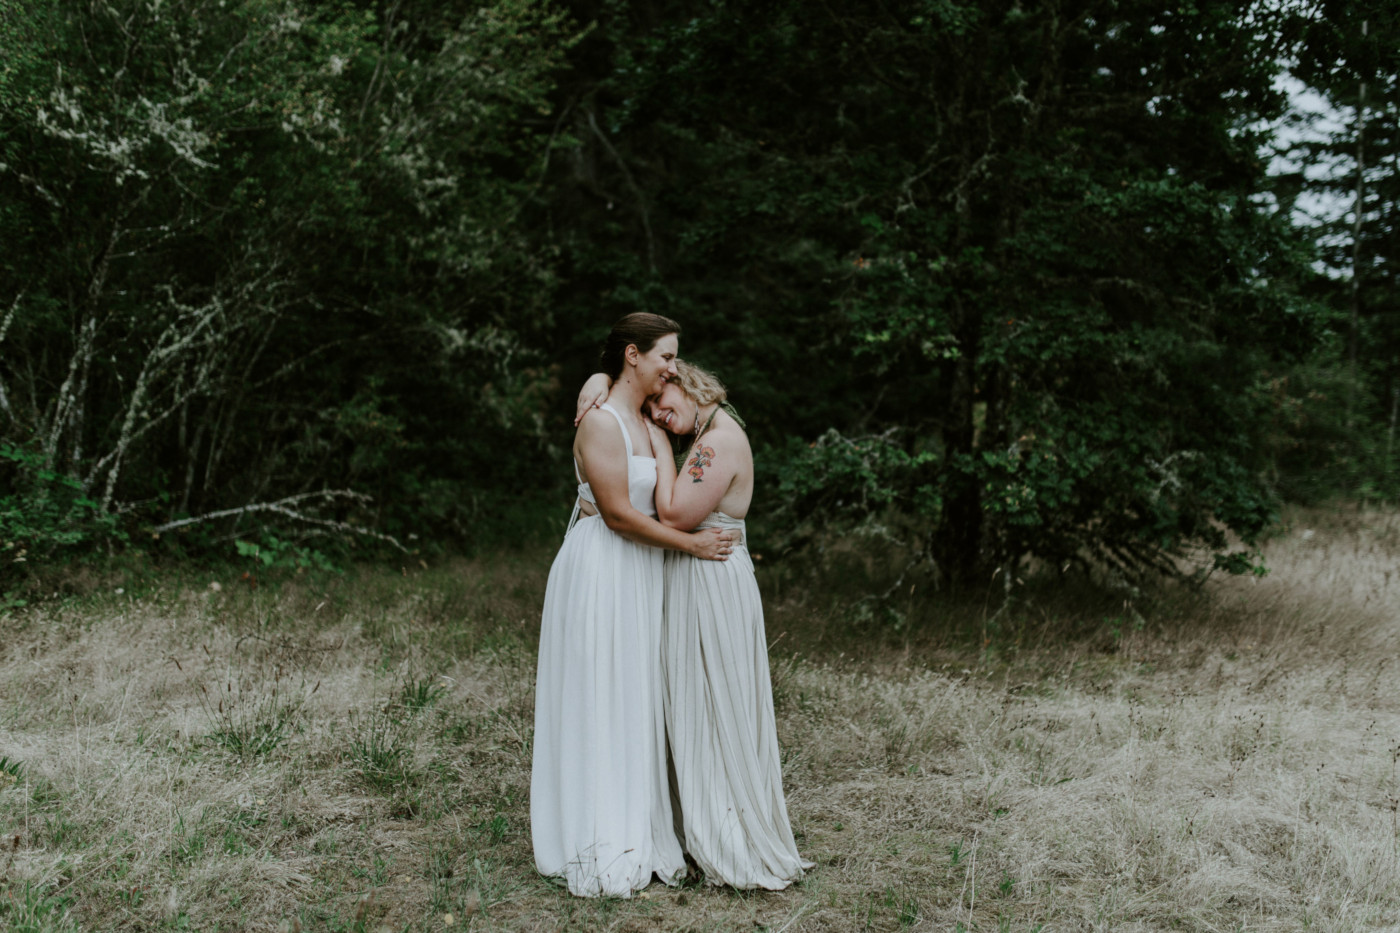 Kate and Audrey hug in a field. Elopement wedding photography at Bridal Veil Falls by Sienna Plus Josh.